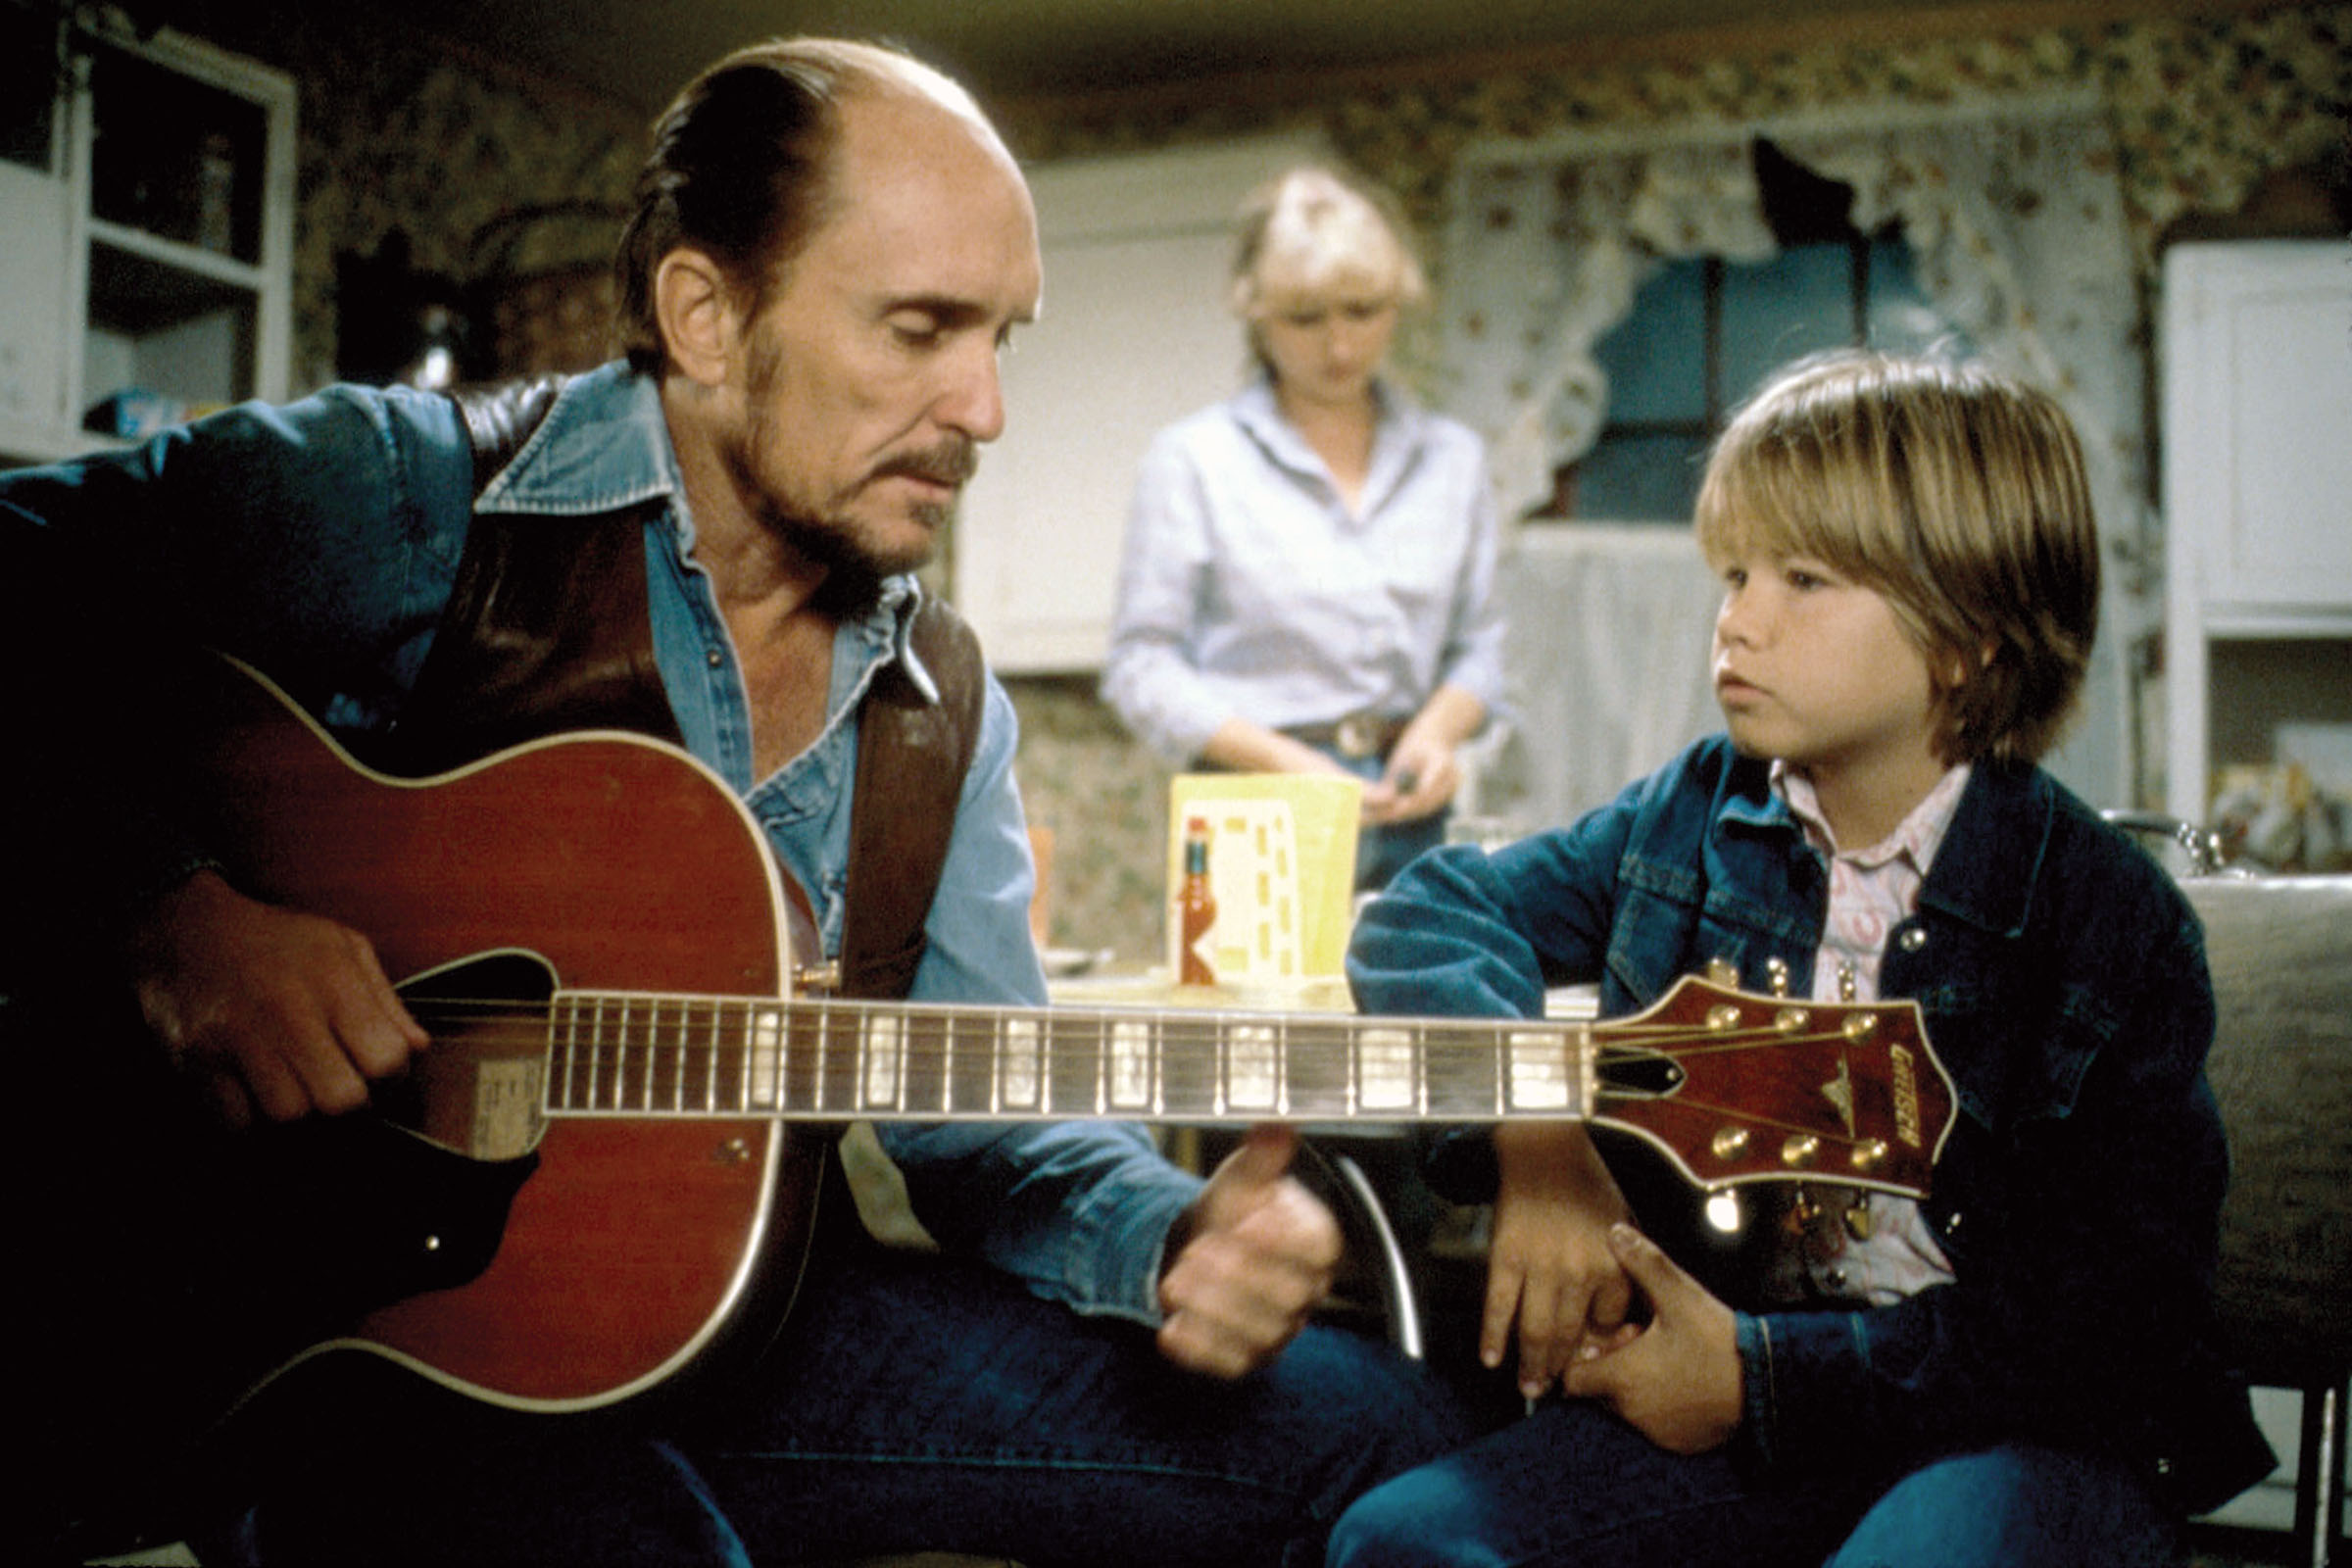 A movie still of an older man teaching a child to play guitar